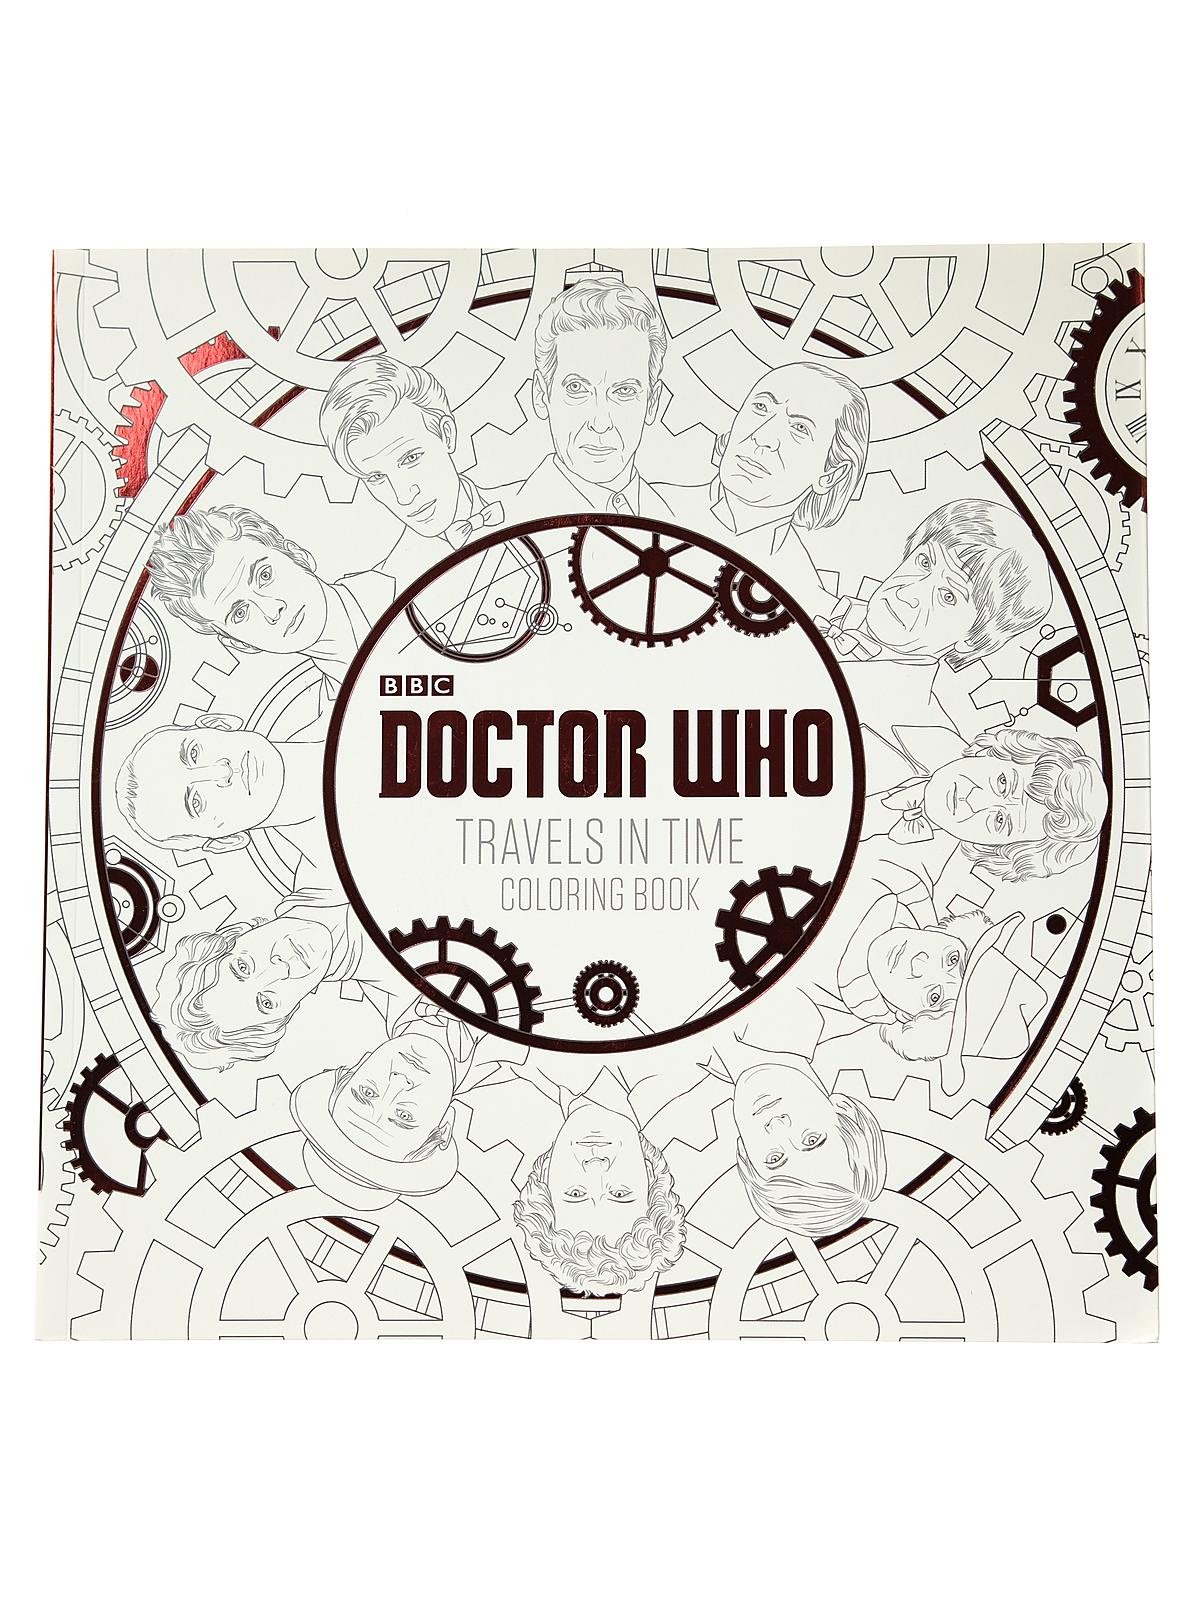 Price Stern Sloan - Doctor Who Travels in Time Coloring Book